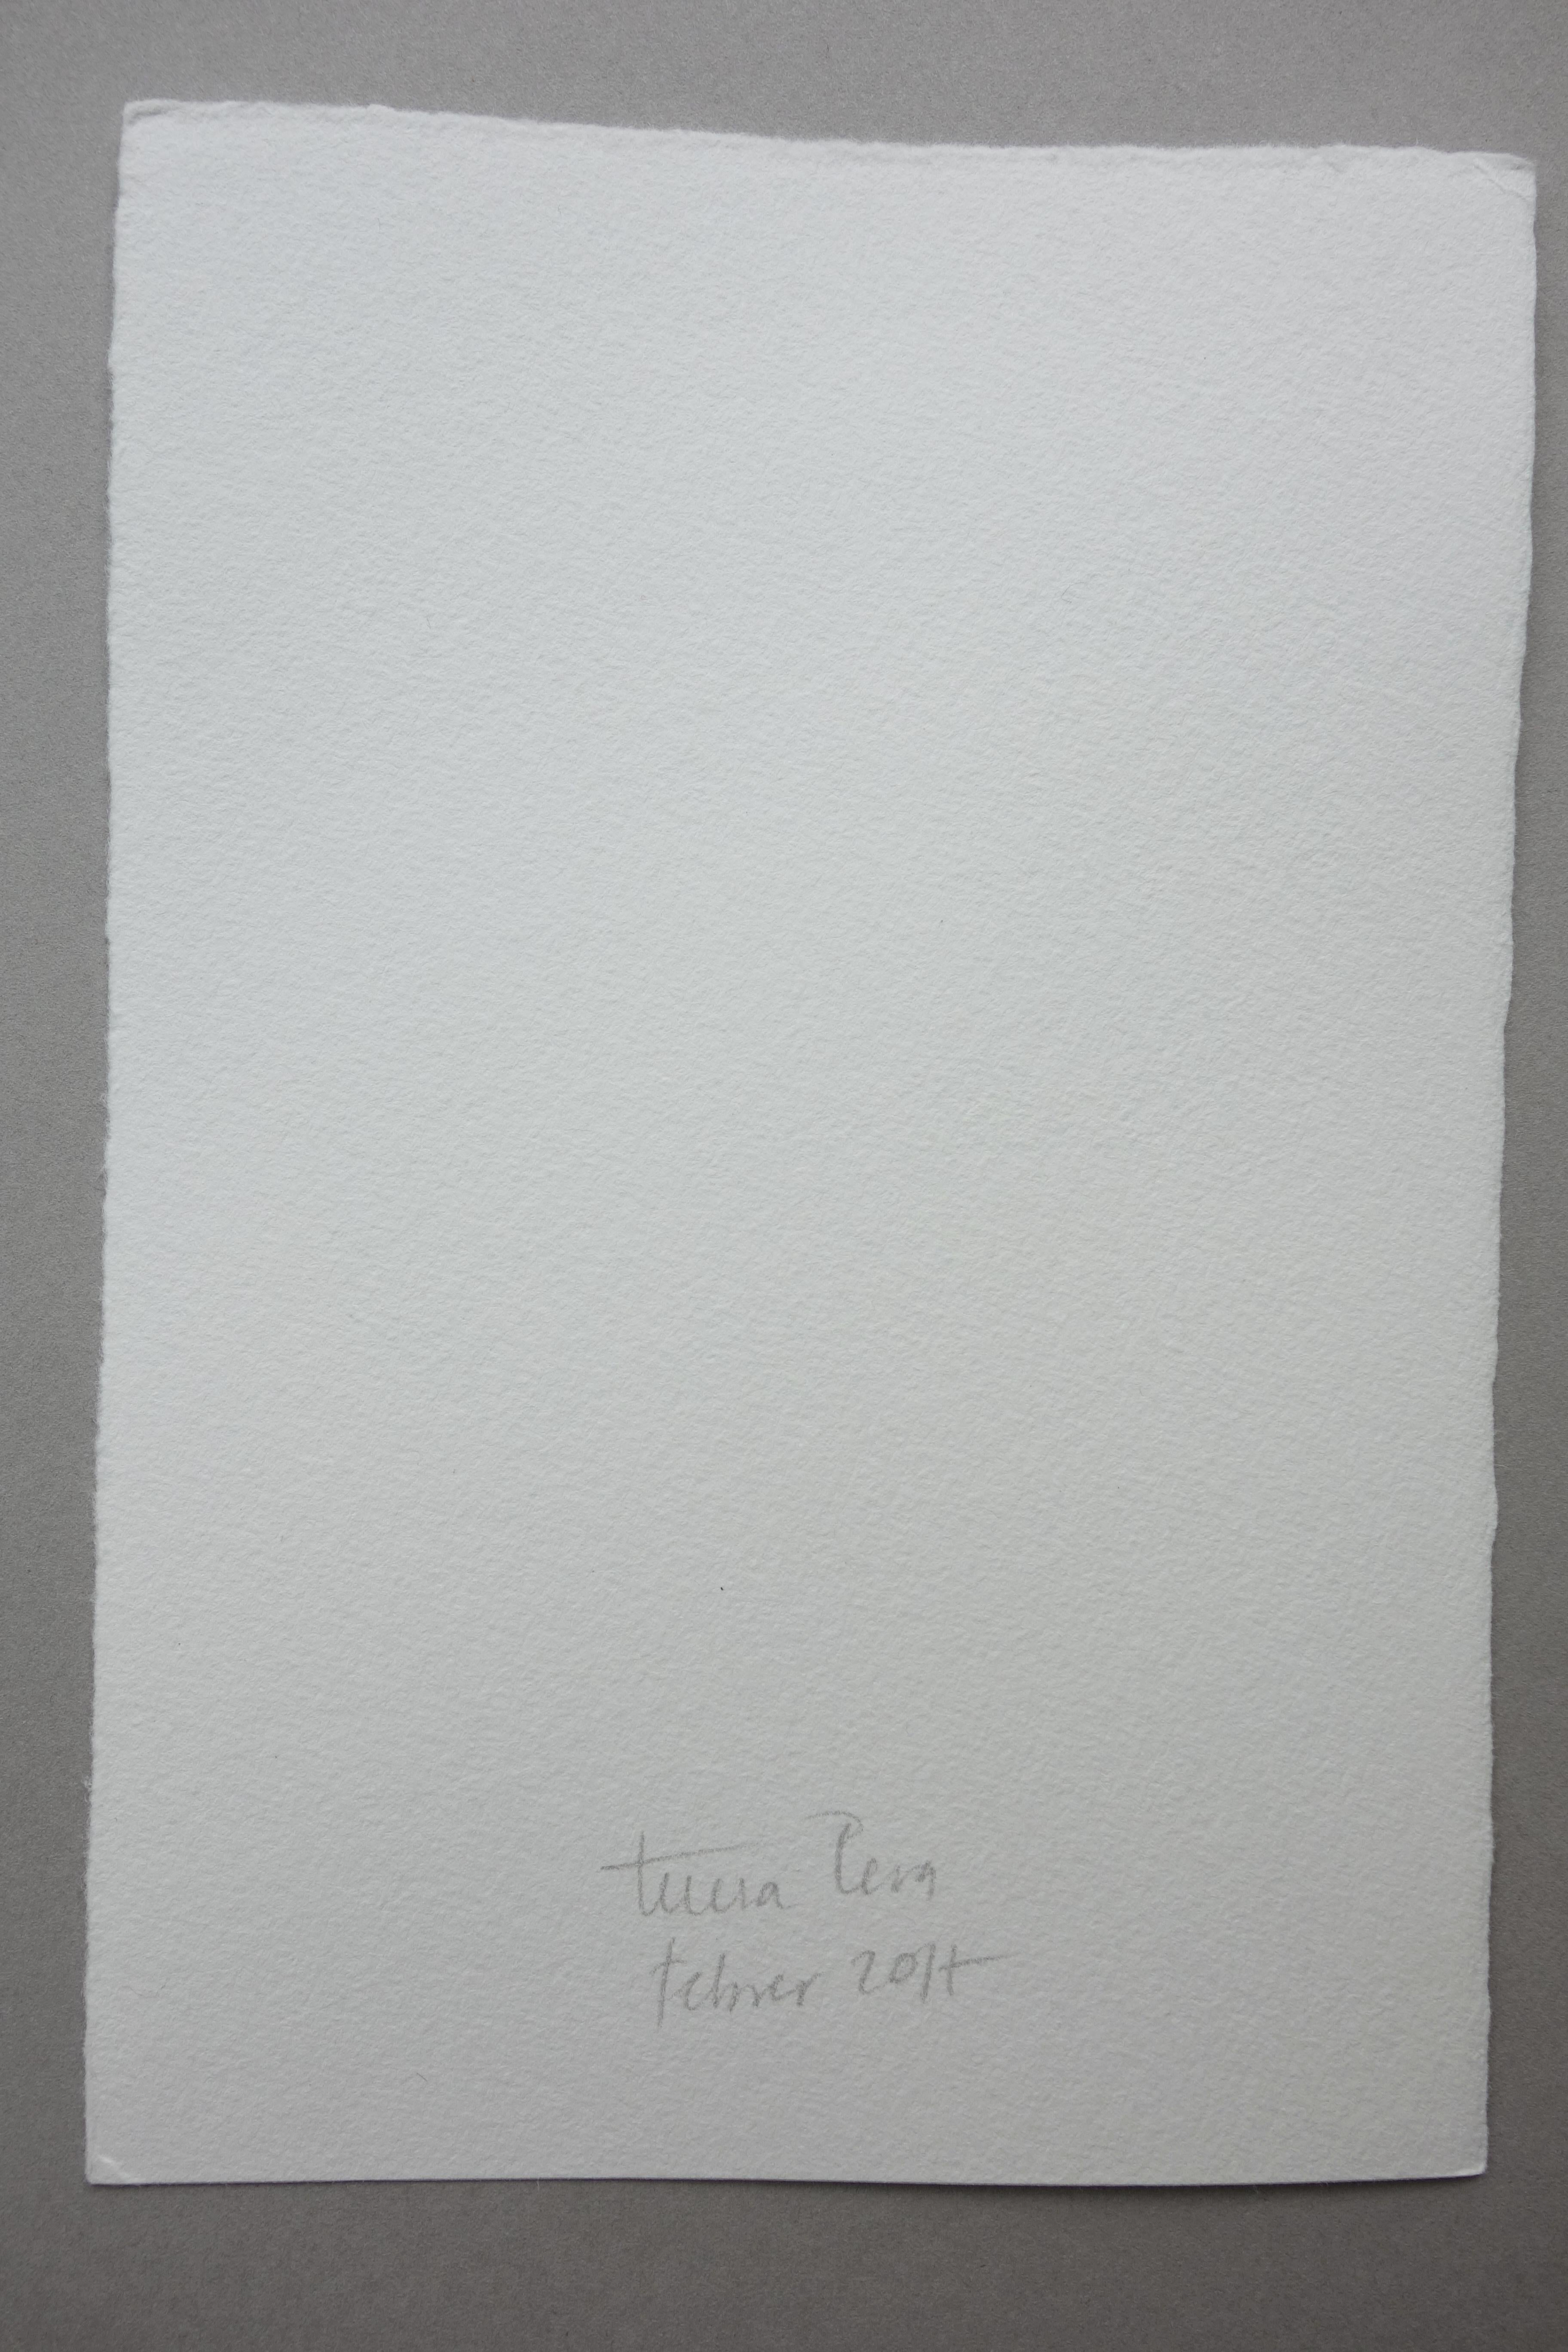 Calligraphy of water - 21st century watercolour - conceptual- Teresa Pera  For Sale 7